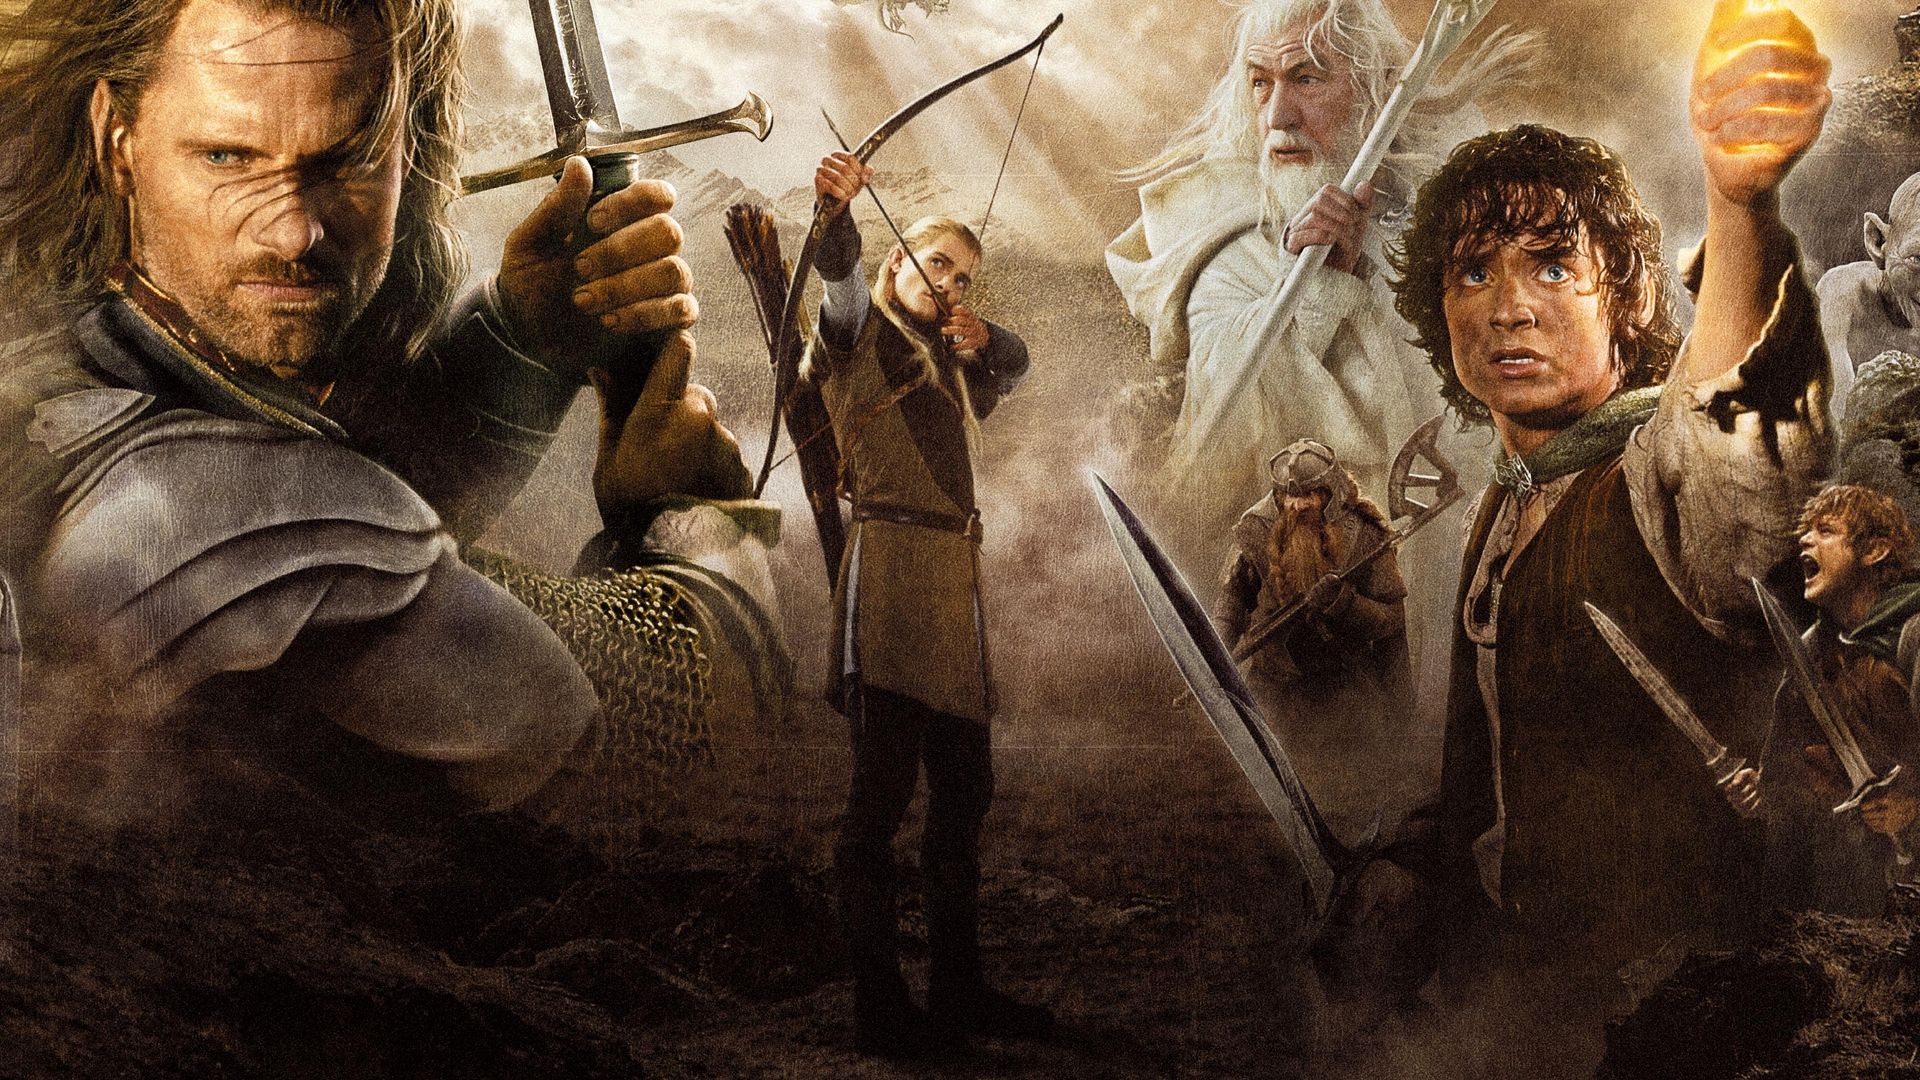 Lord Of The Rings Hd Wallpapers | Free HD Desktop Wallpapers ...